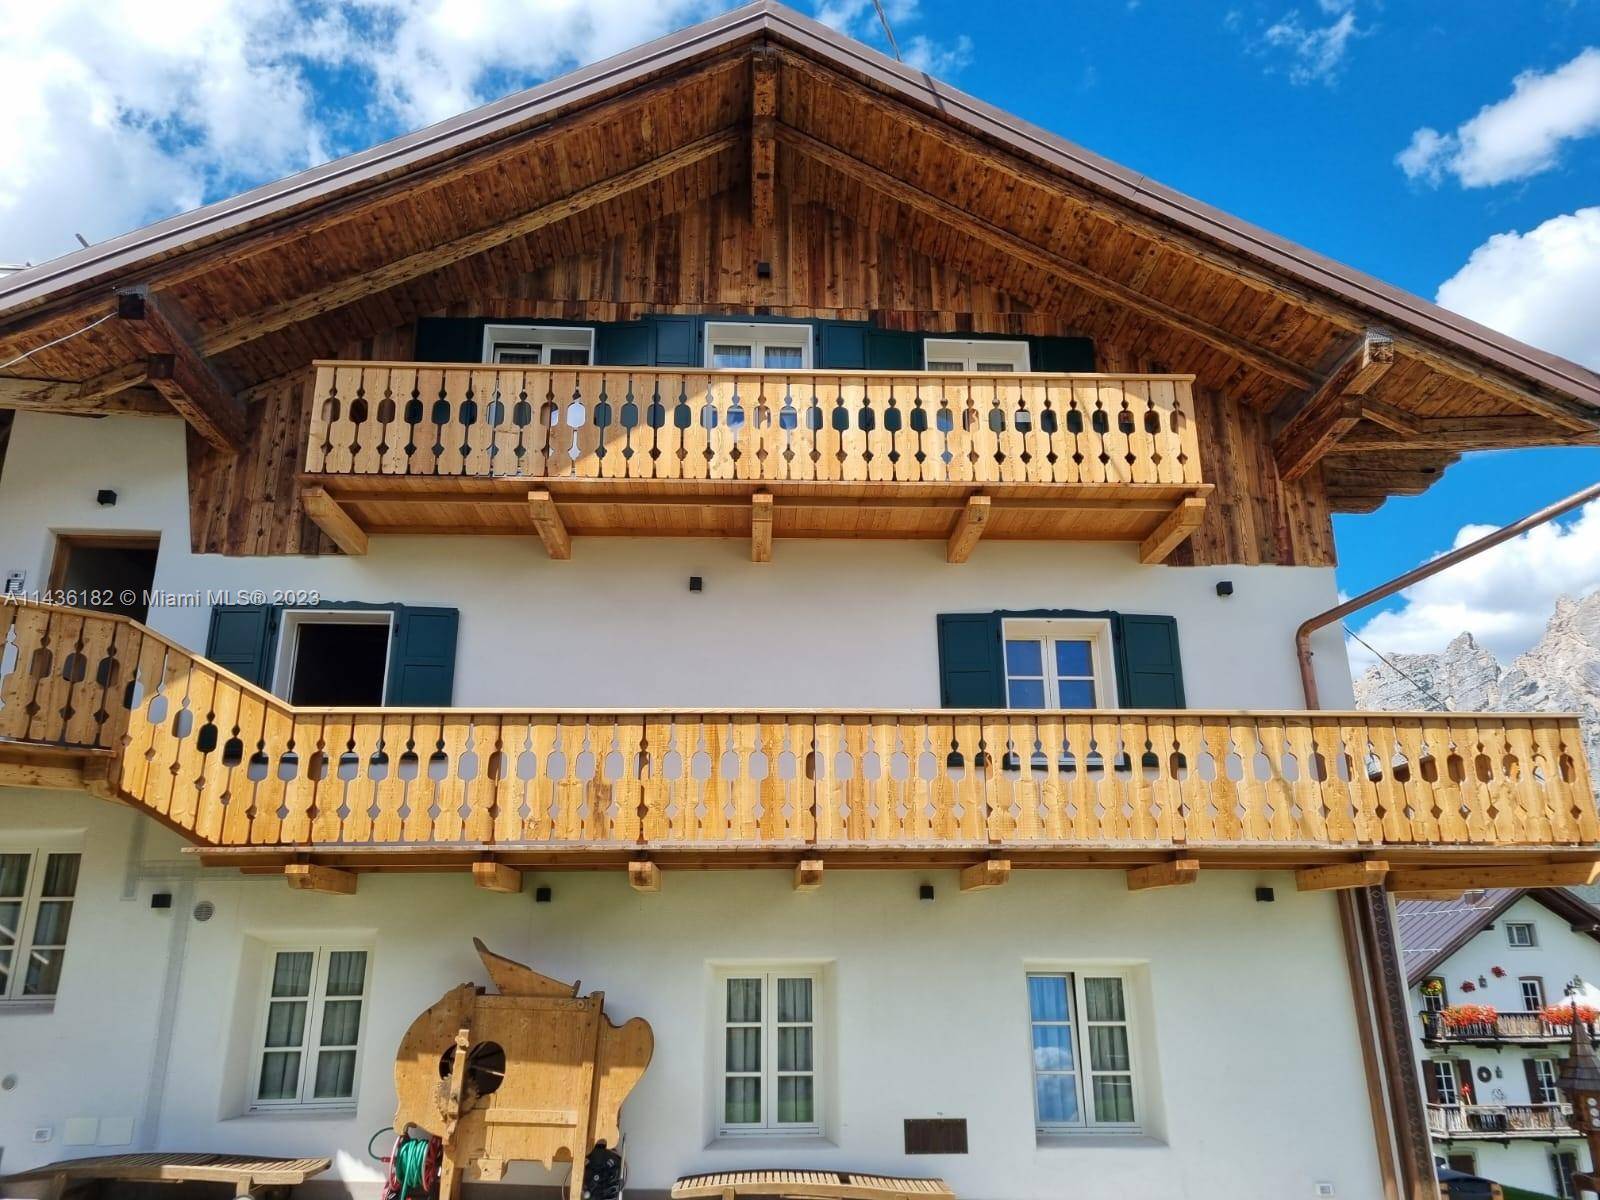 This exquisite penthouse residence, located in Cortina d Ampezzo, Italy, with breathtaking views of the Dolomites is truly a gem !